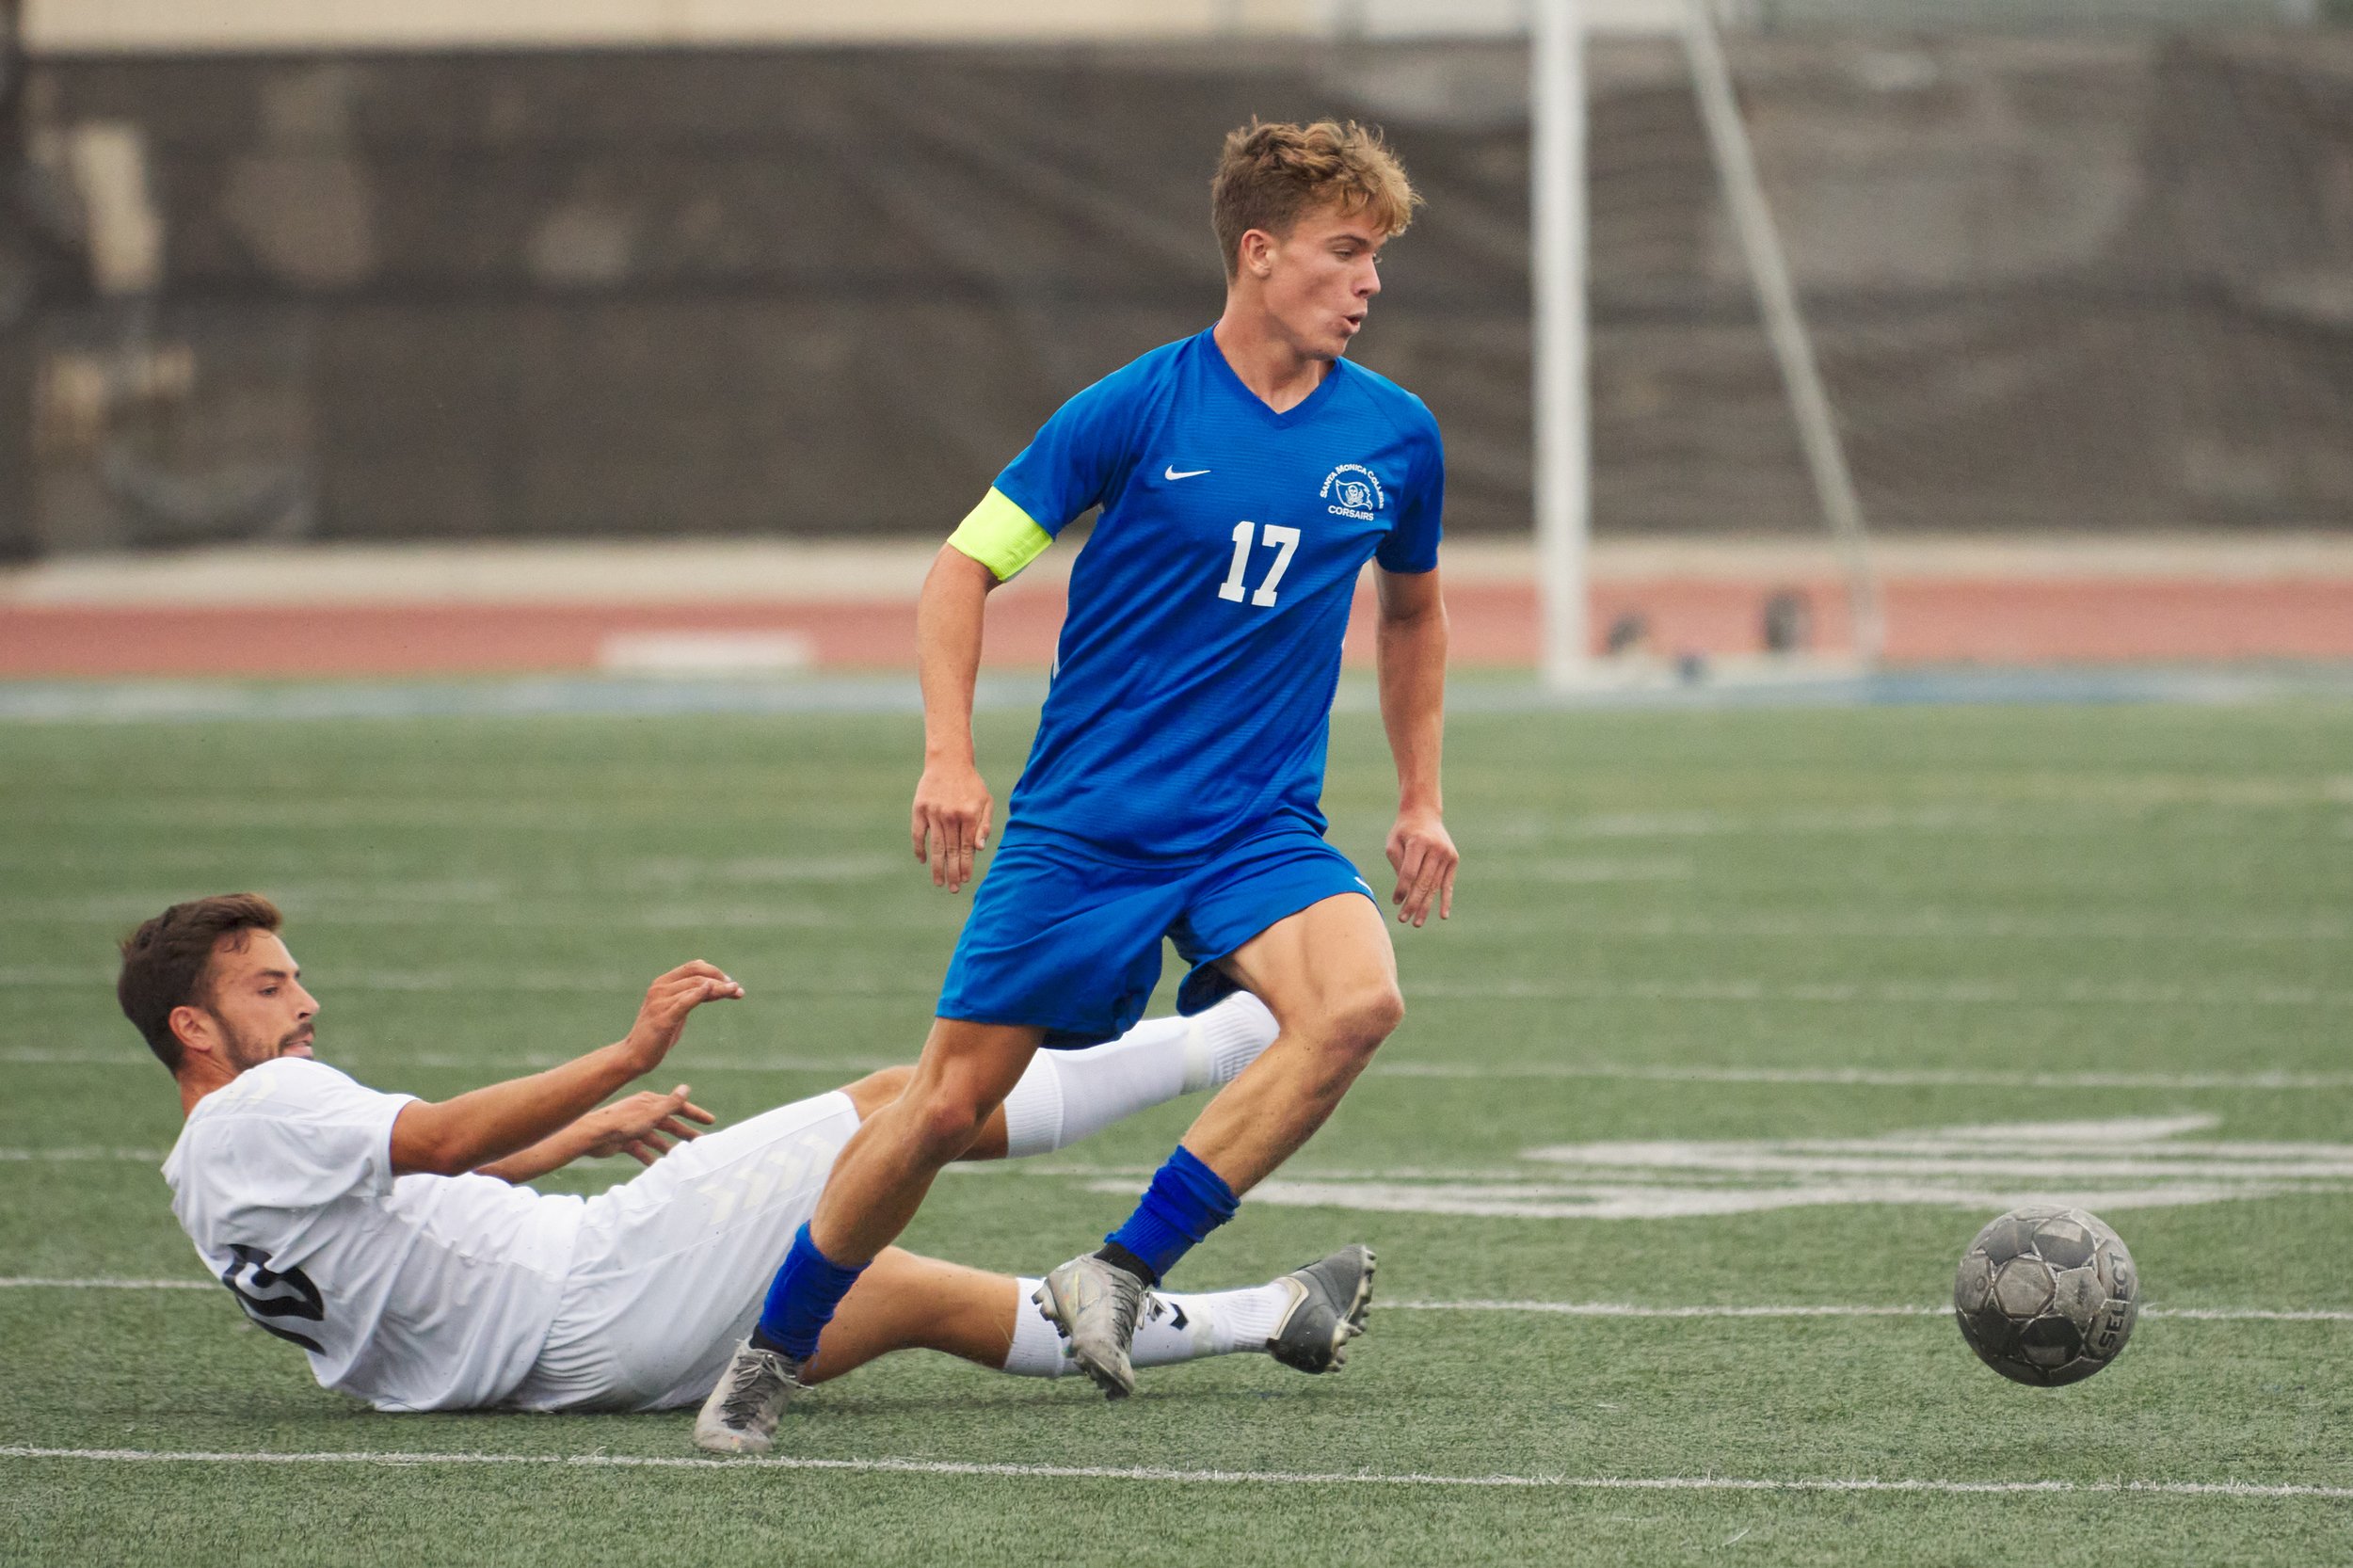  Taj Winnard (right), of the Santa Monica College Corsairs, and [PLAYER 30] (left), of the Los Angeles Harbor College Seahawks, during the men's soccer match on Friday, September, 9, 2022, at Corsair Field in Santa Monica, Calif . The Corsairs won 4-